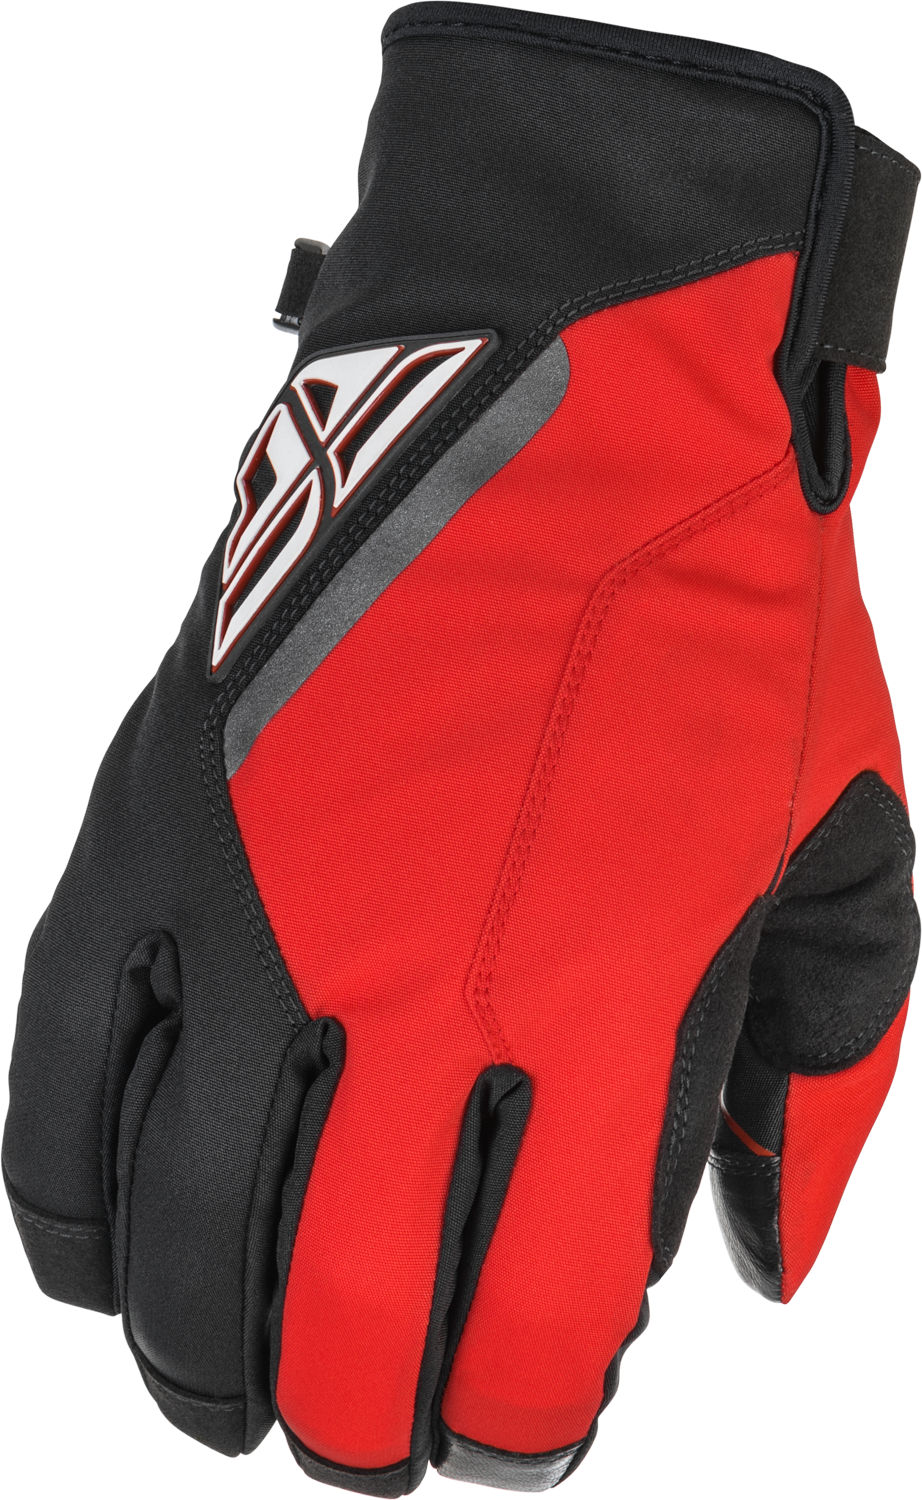 FLY RACING Title Gloves Black/Red Sz 07 371-05307